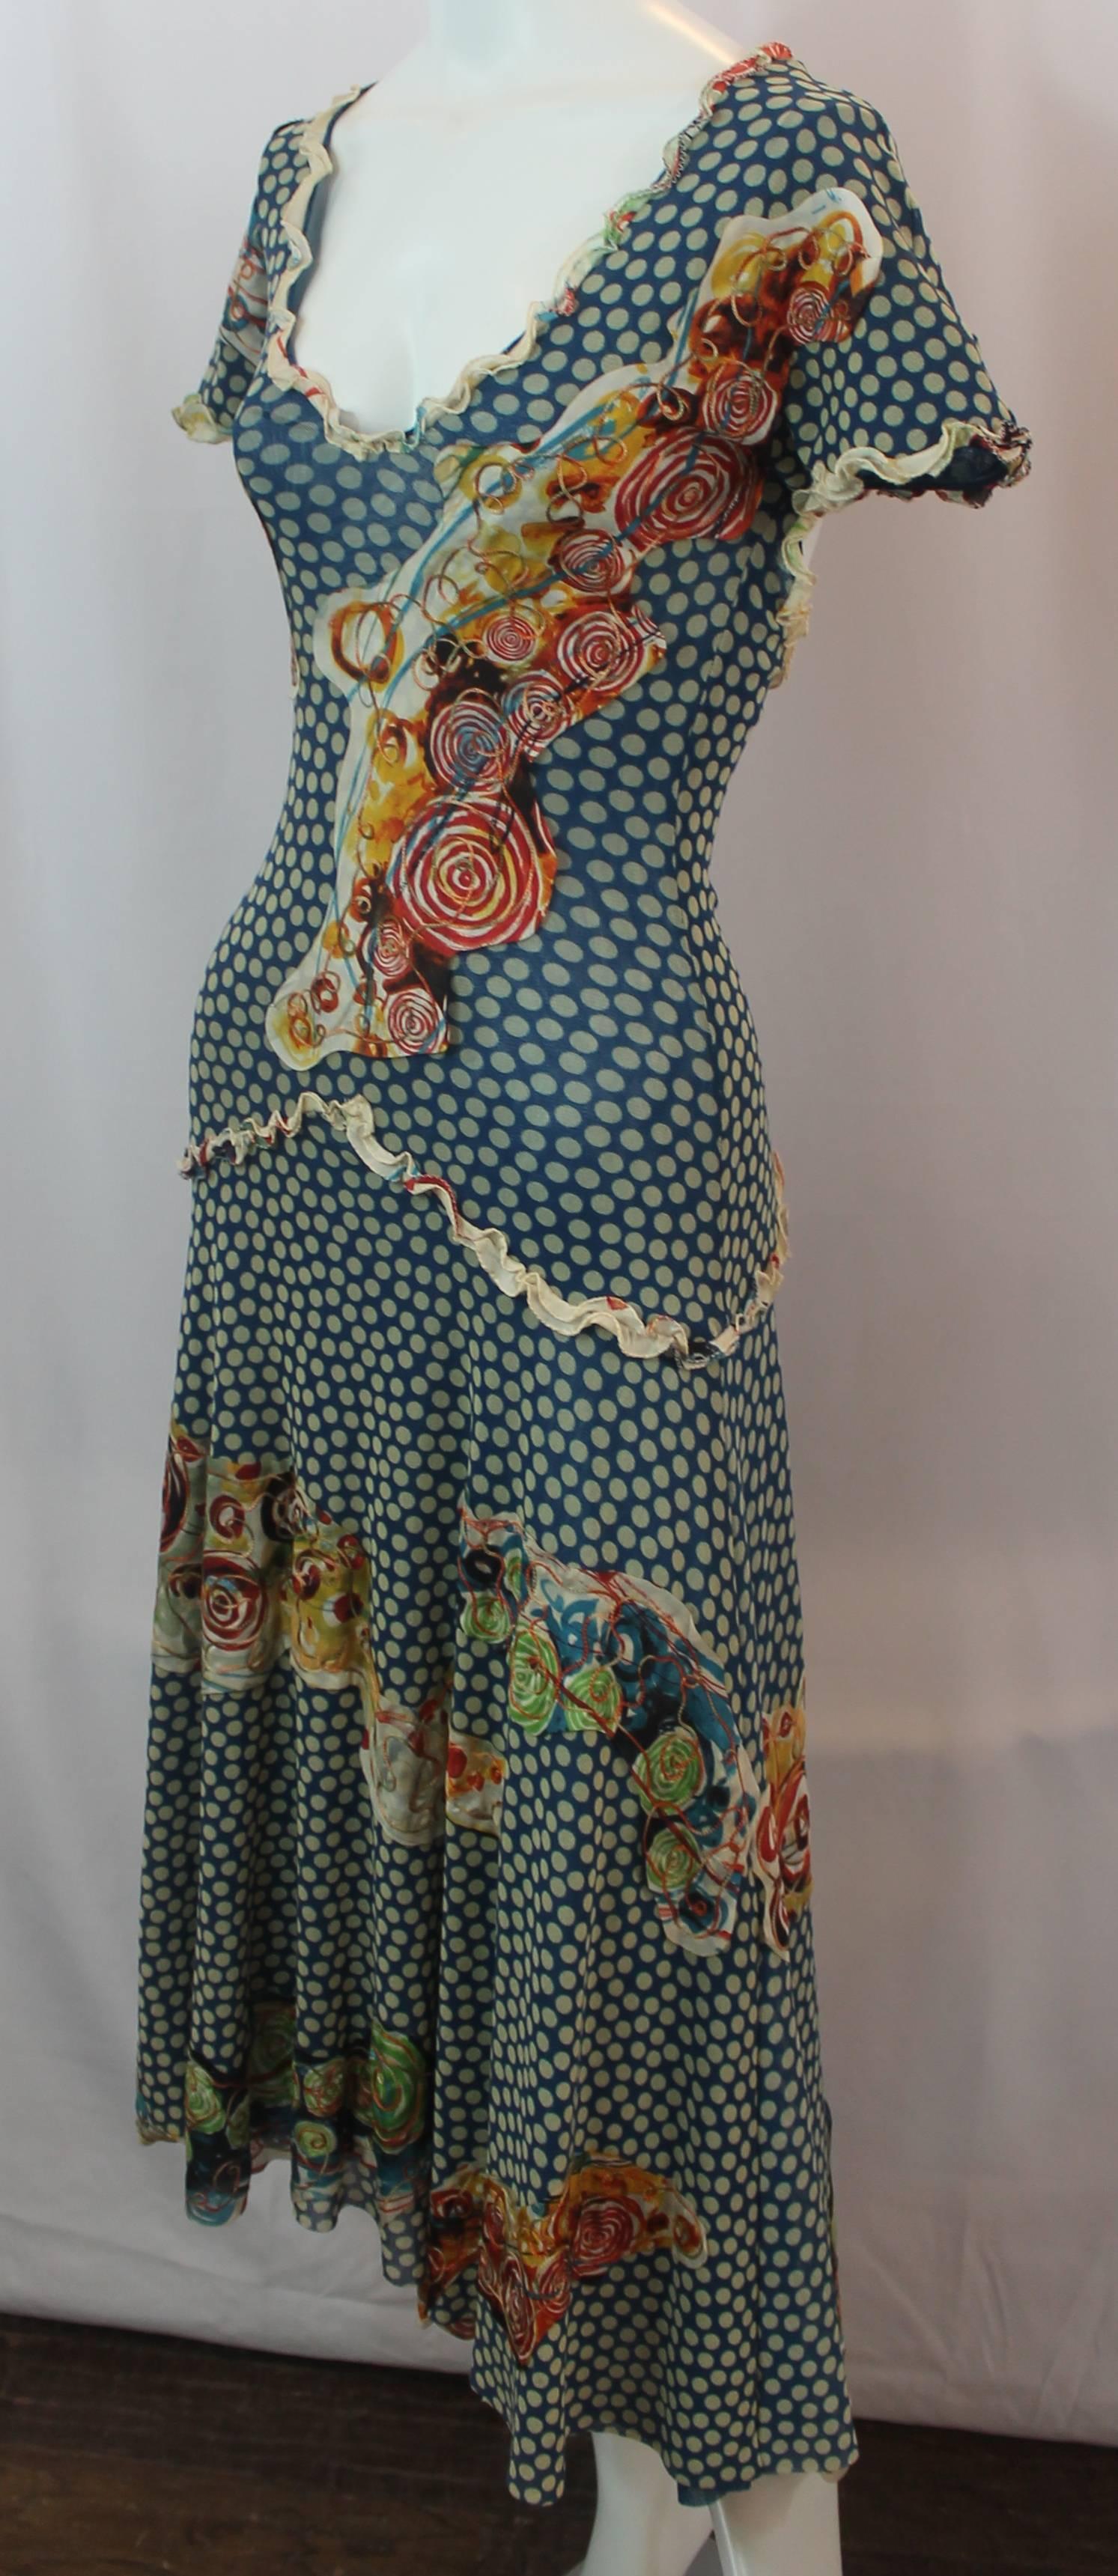 Jean Paul Gaultier Blue Polka Dot Dress with Embellishing - S - 1990's. This dress is in excellent vintage condition with very minor wear consistent with age. The short sleeve dress features a stretchy mesh material, thin ruffle trim and detailing,